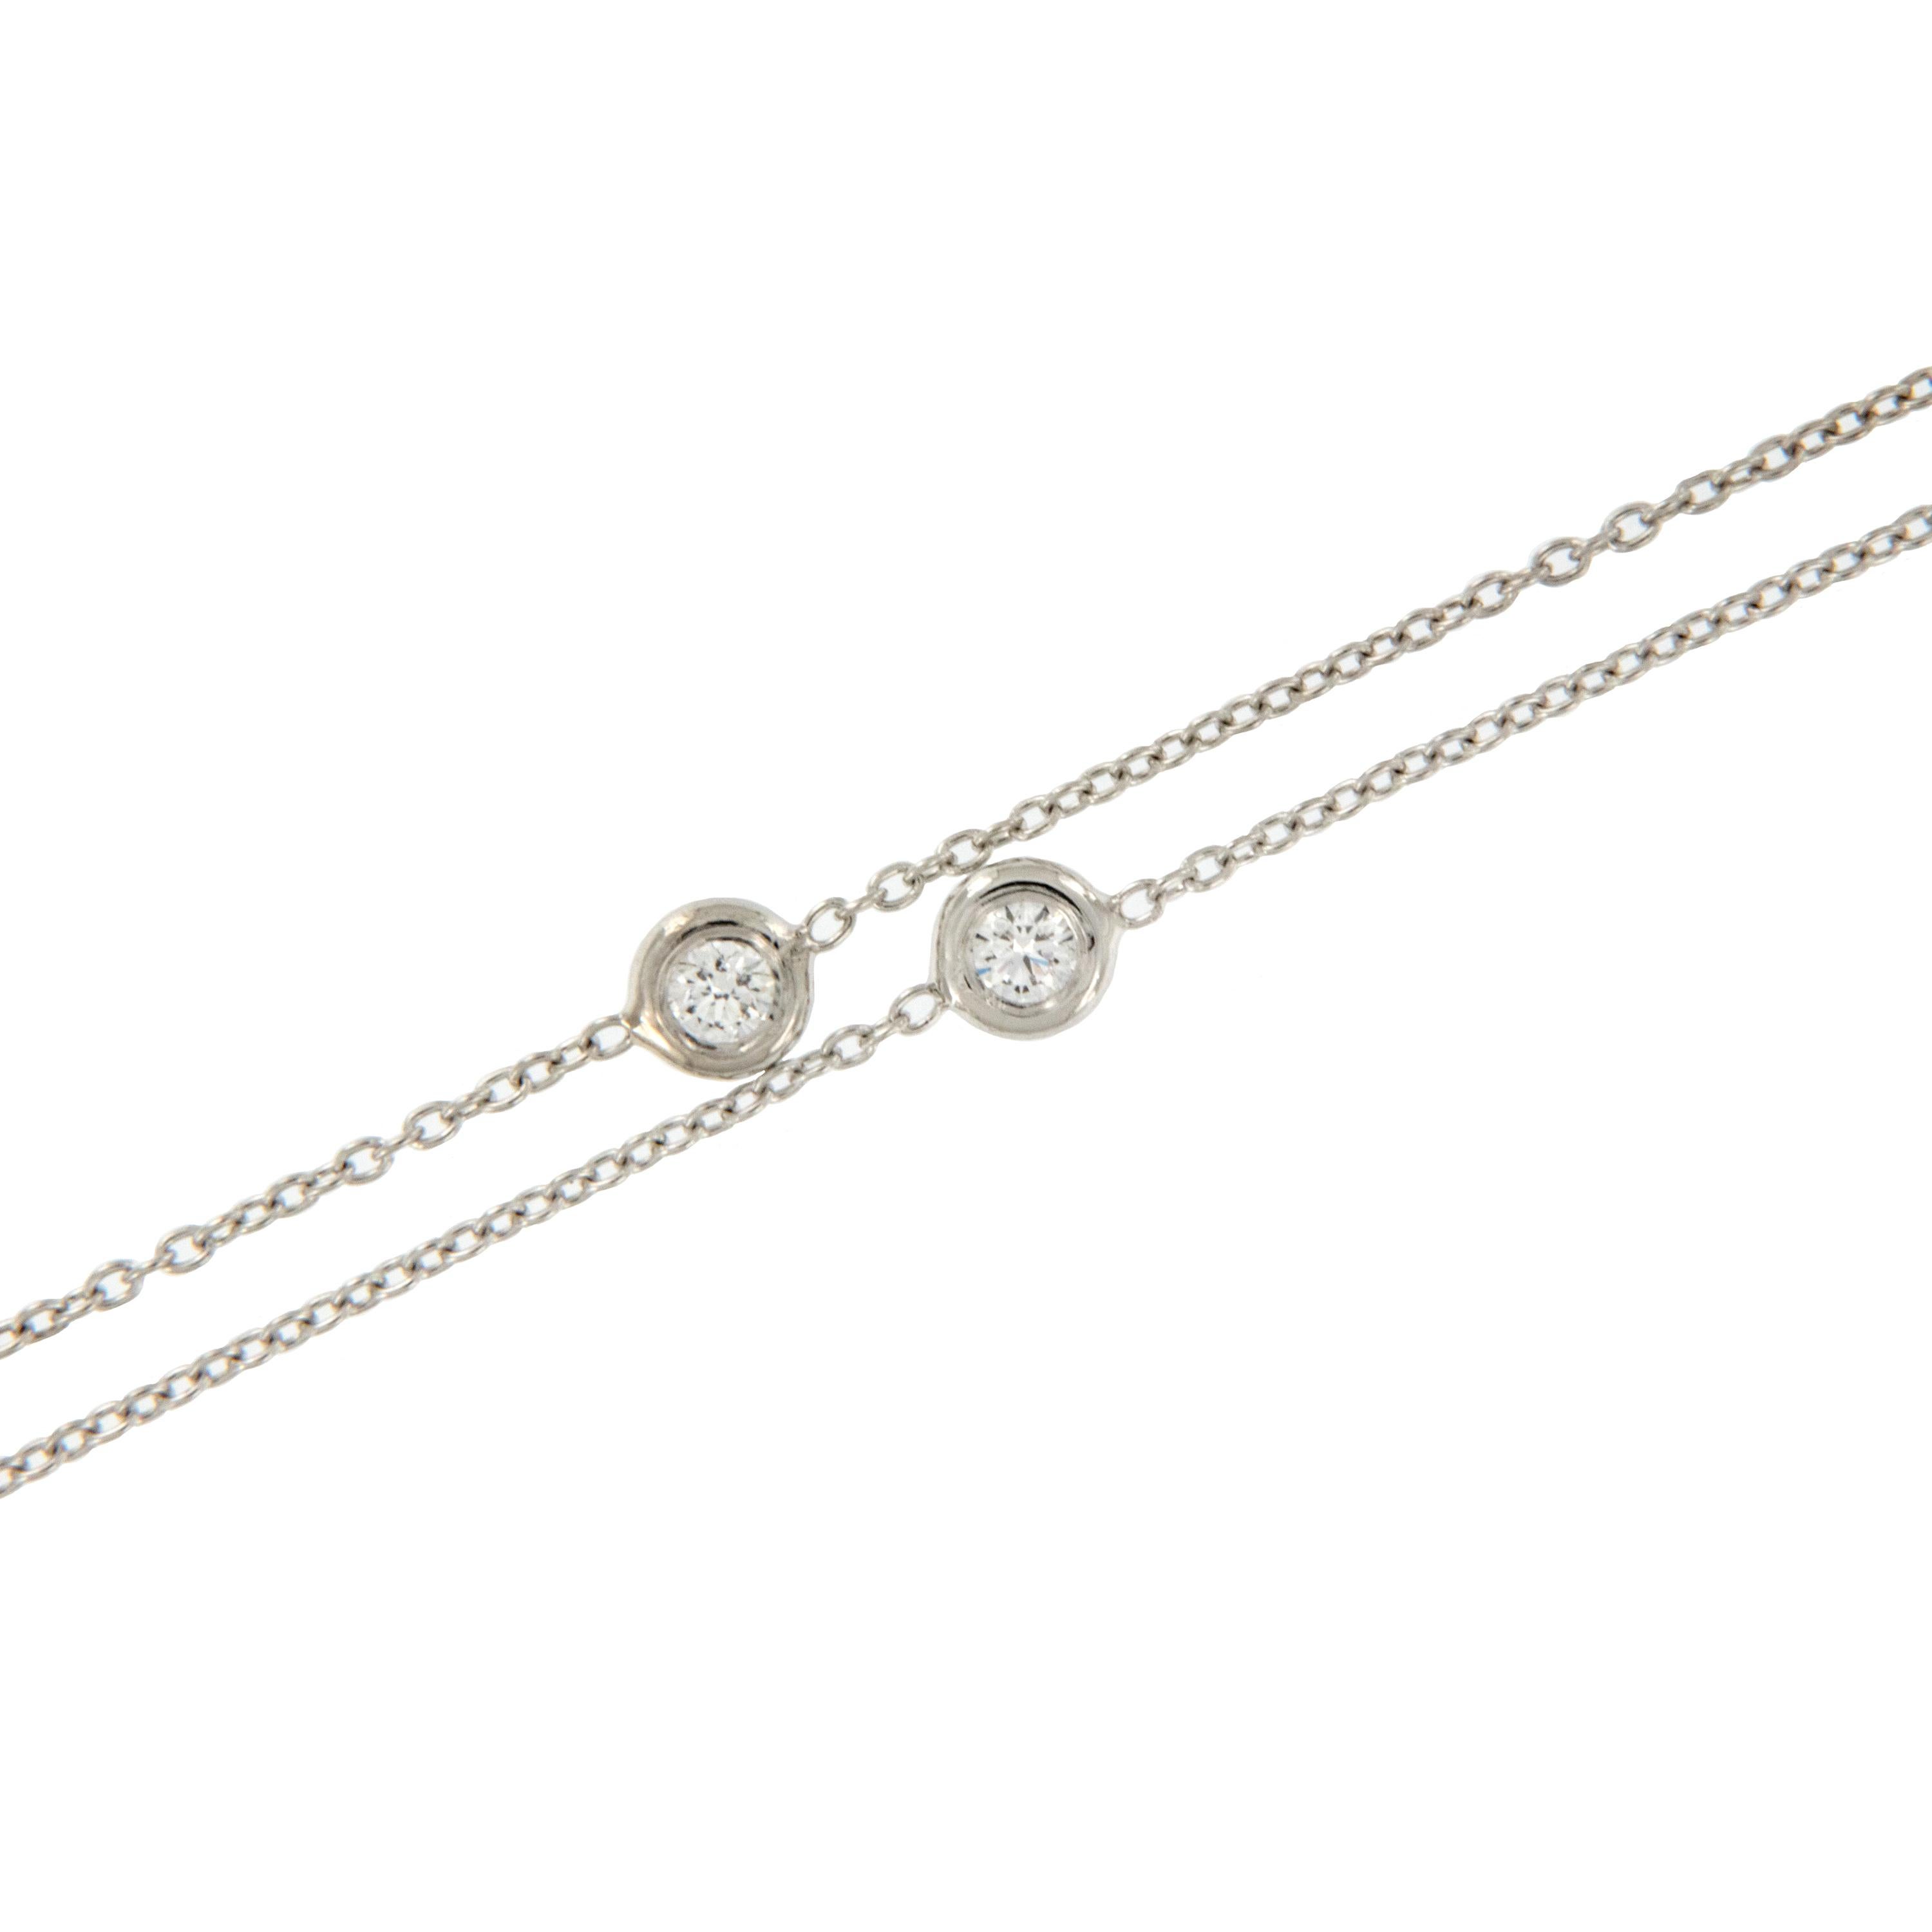 Made of pure, noble platinum with seven fine quality diamonds (VS clarity, F-G color) this station necklace stands the test of time! You can wear every day with jeans, yet it also looks fantastic dressed up on a little black dress! 16